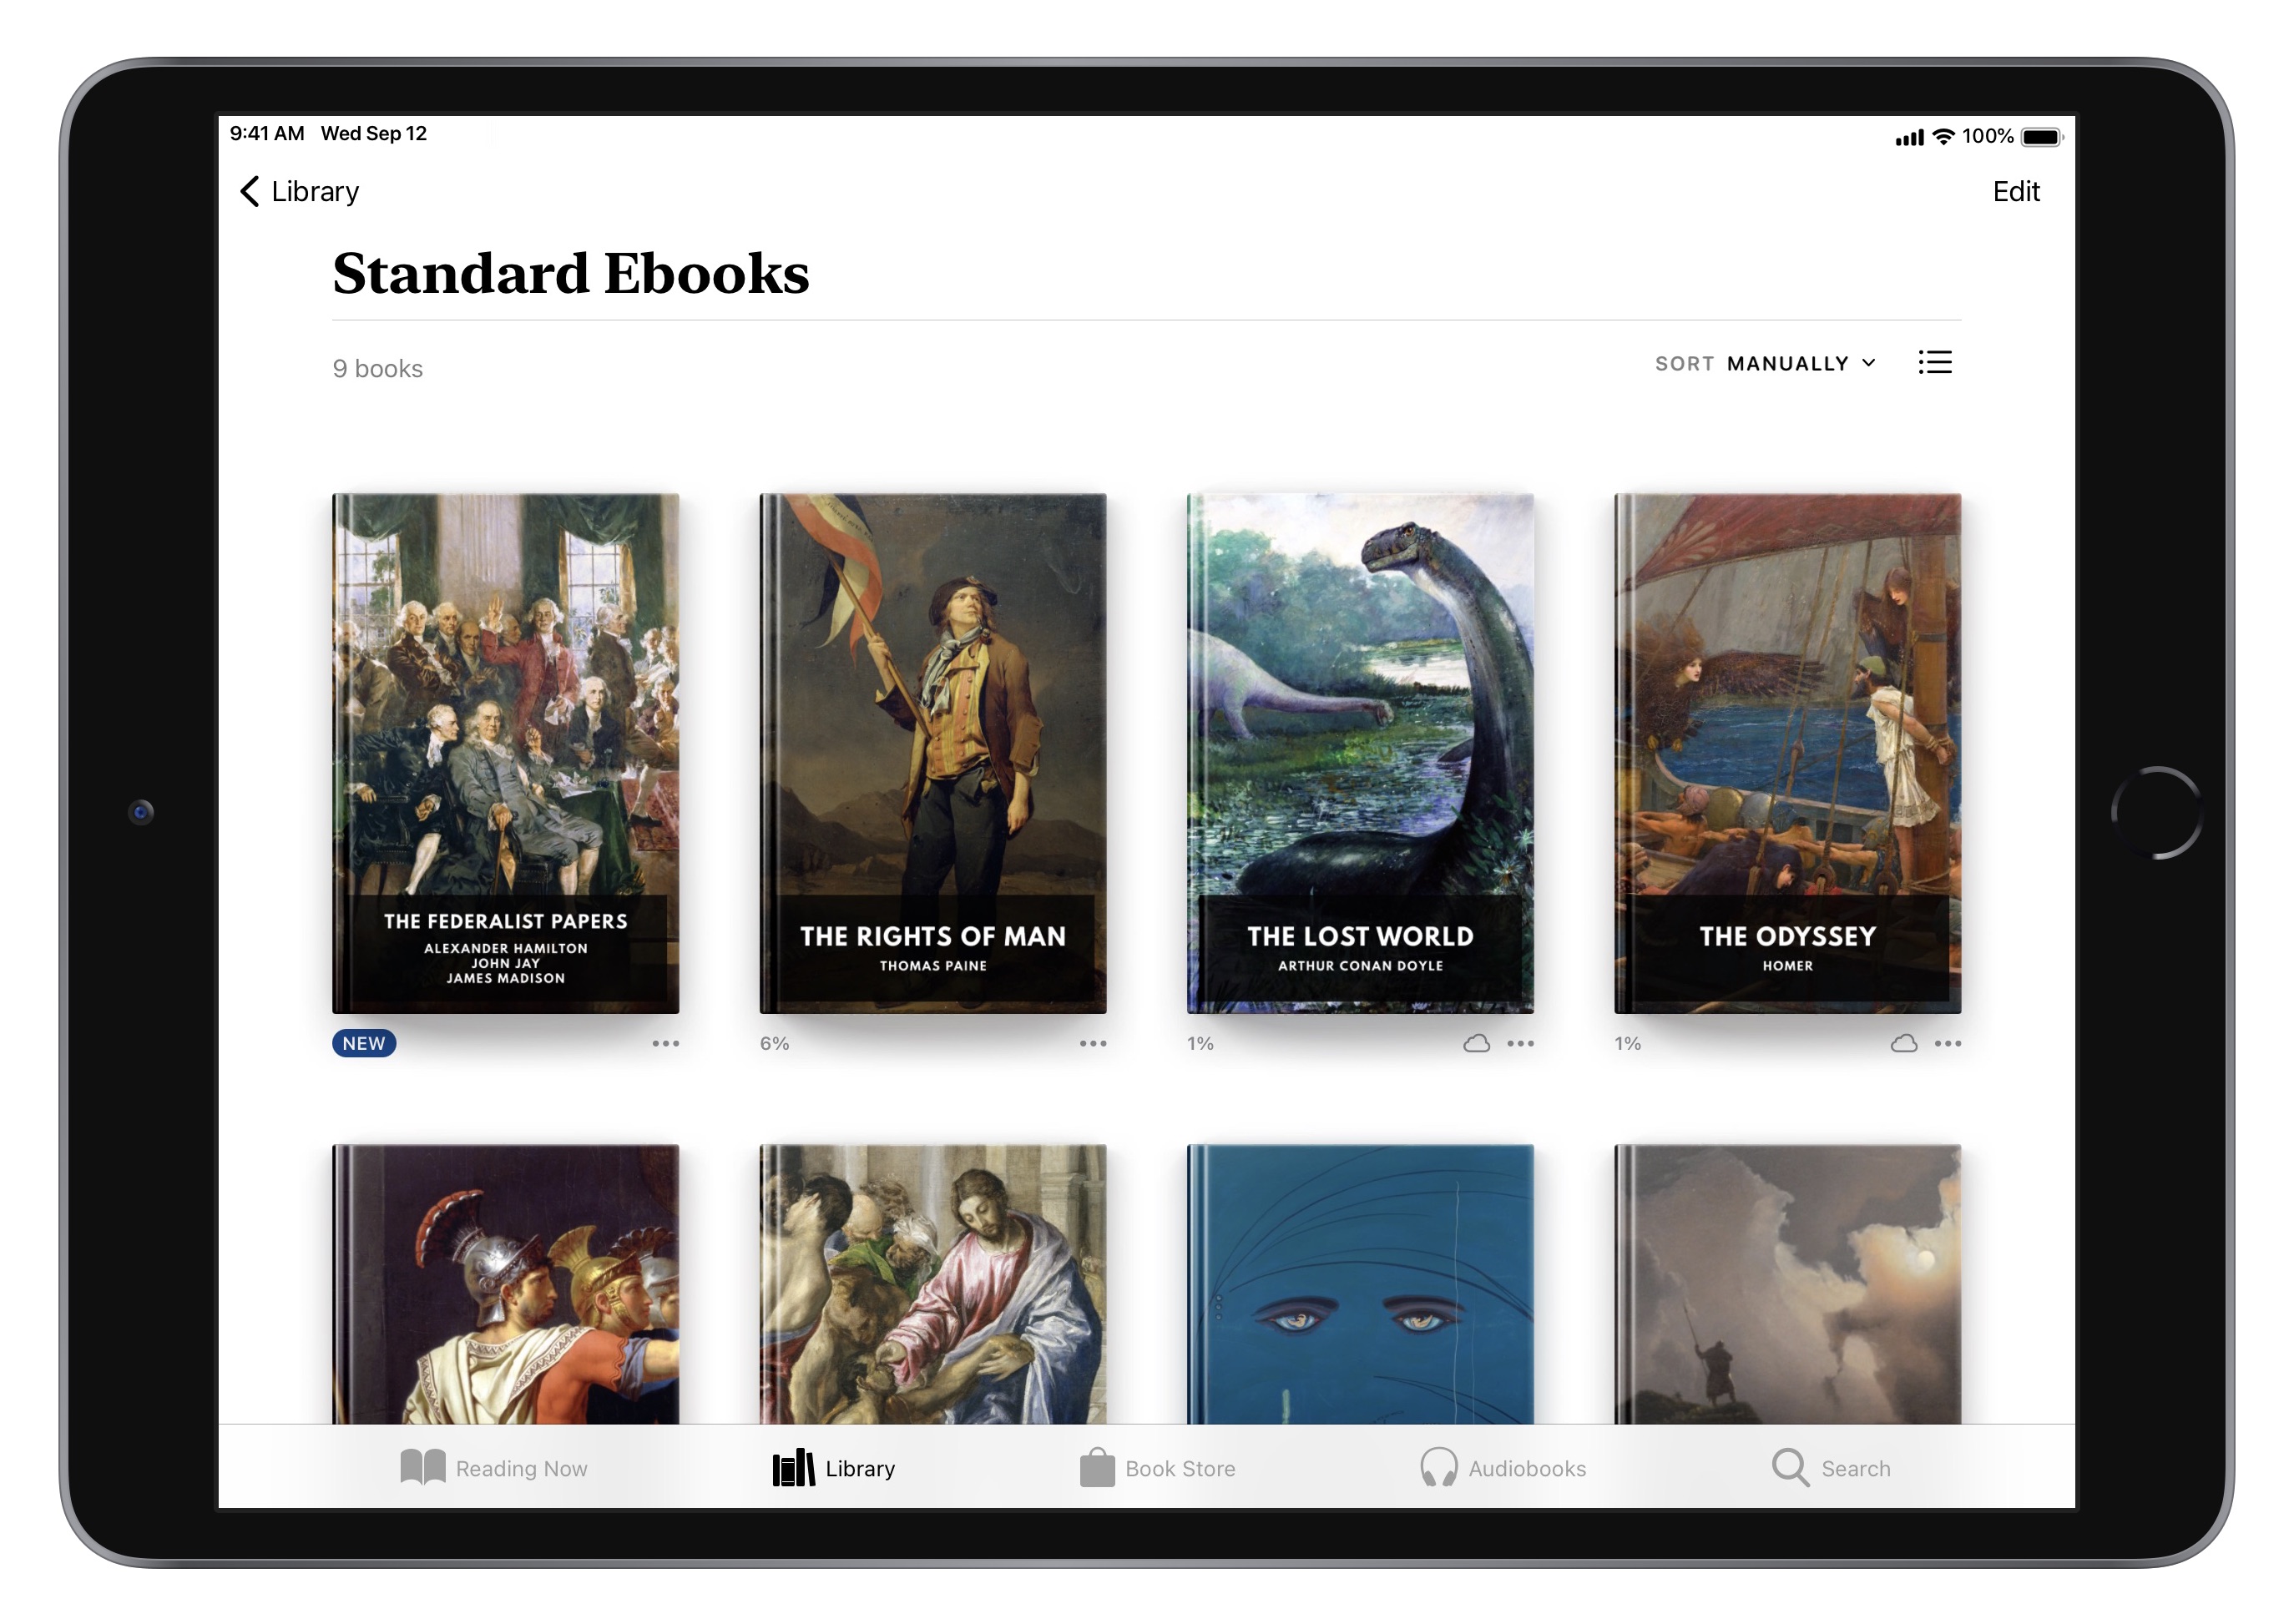 Standard Ebooks: Free and liberated ebooks, carefully produced for